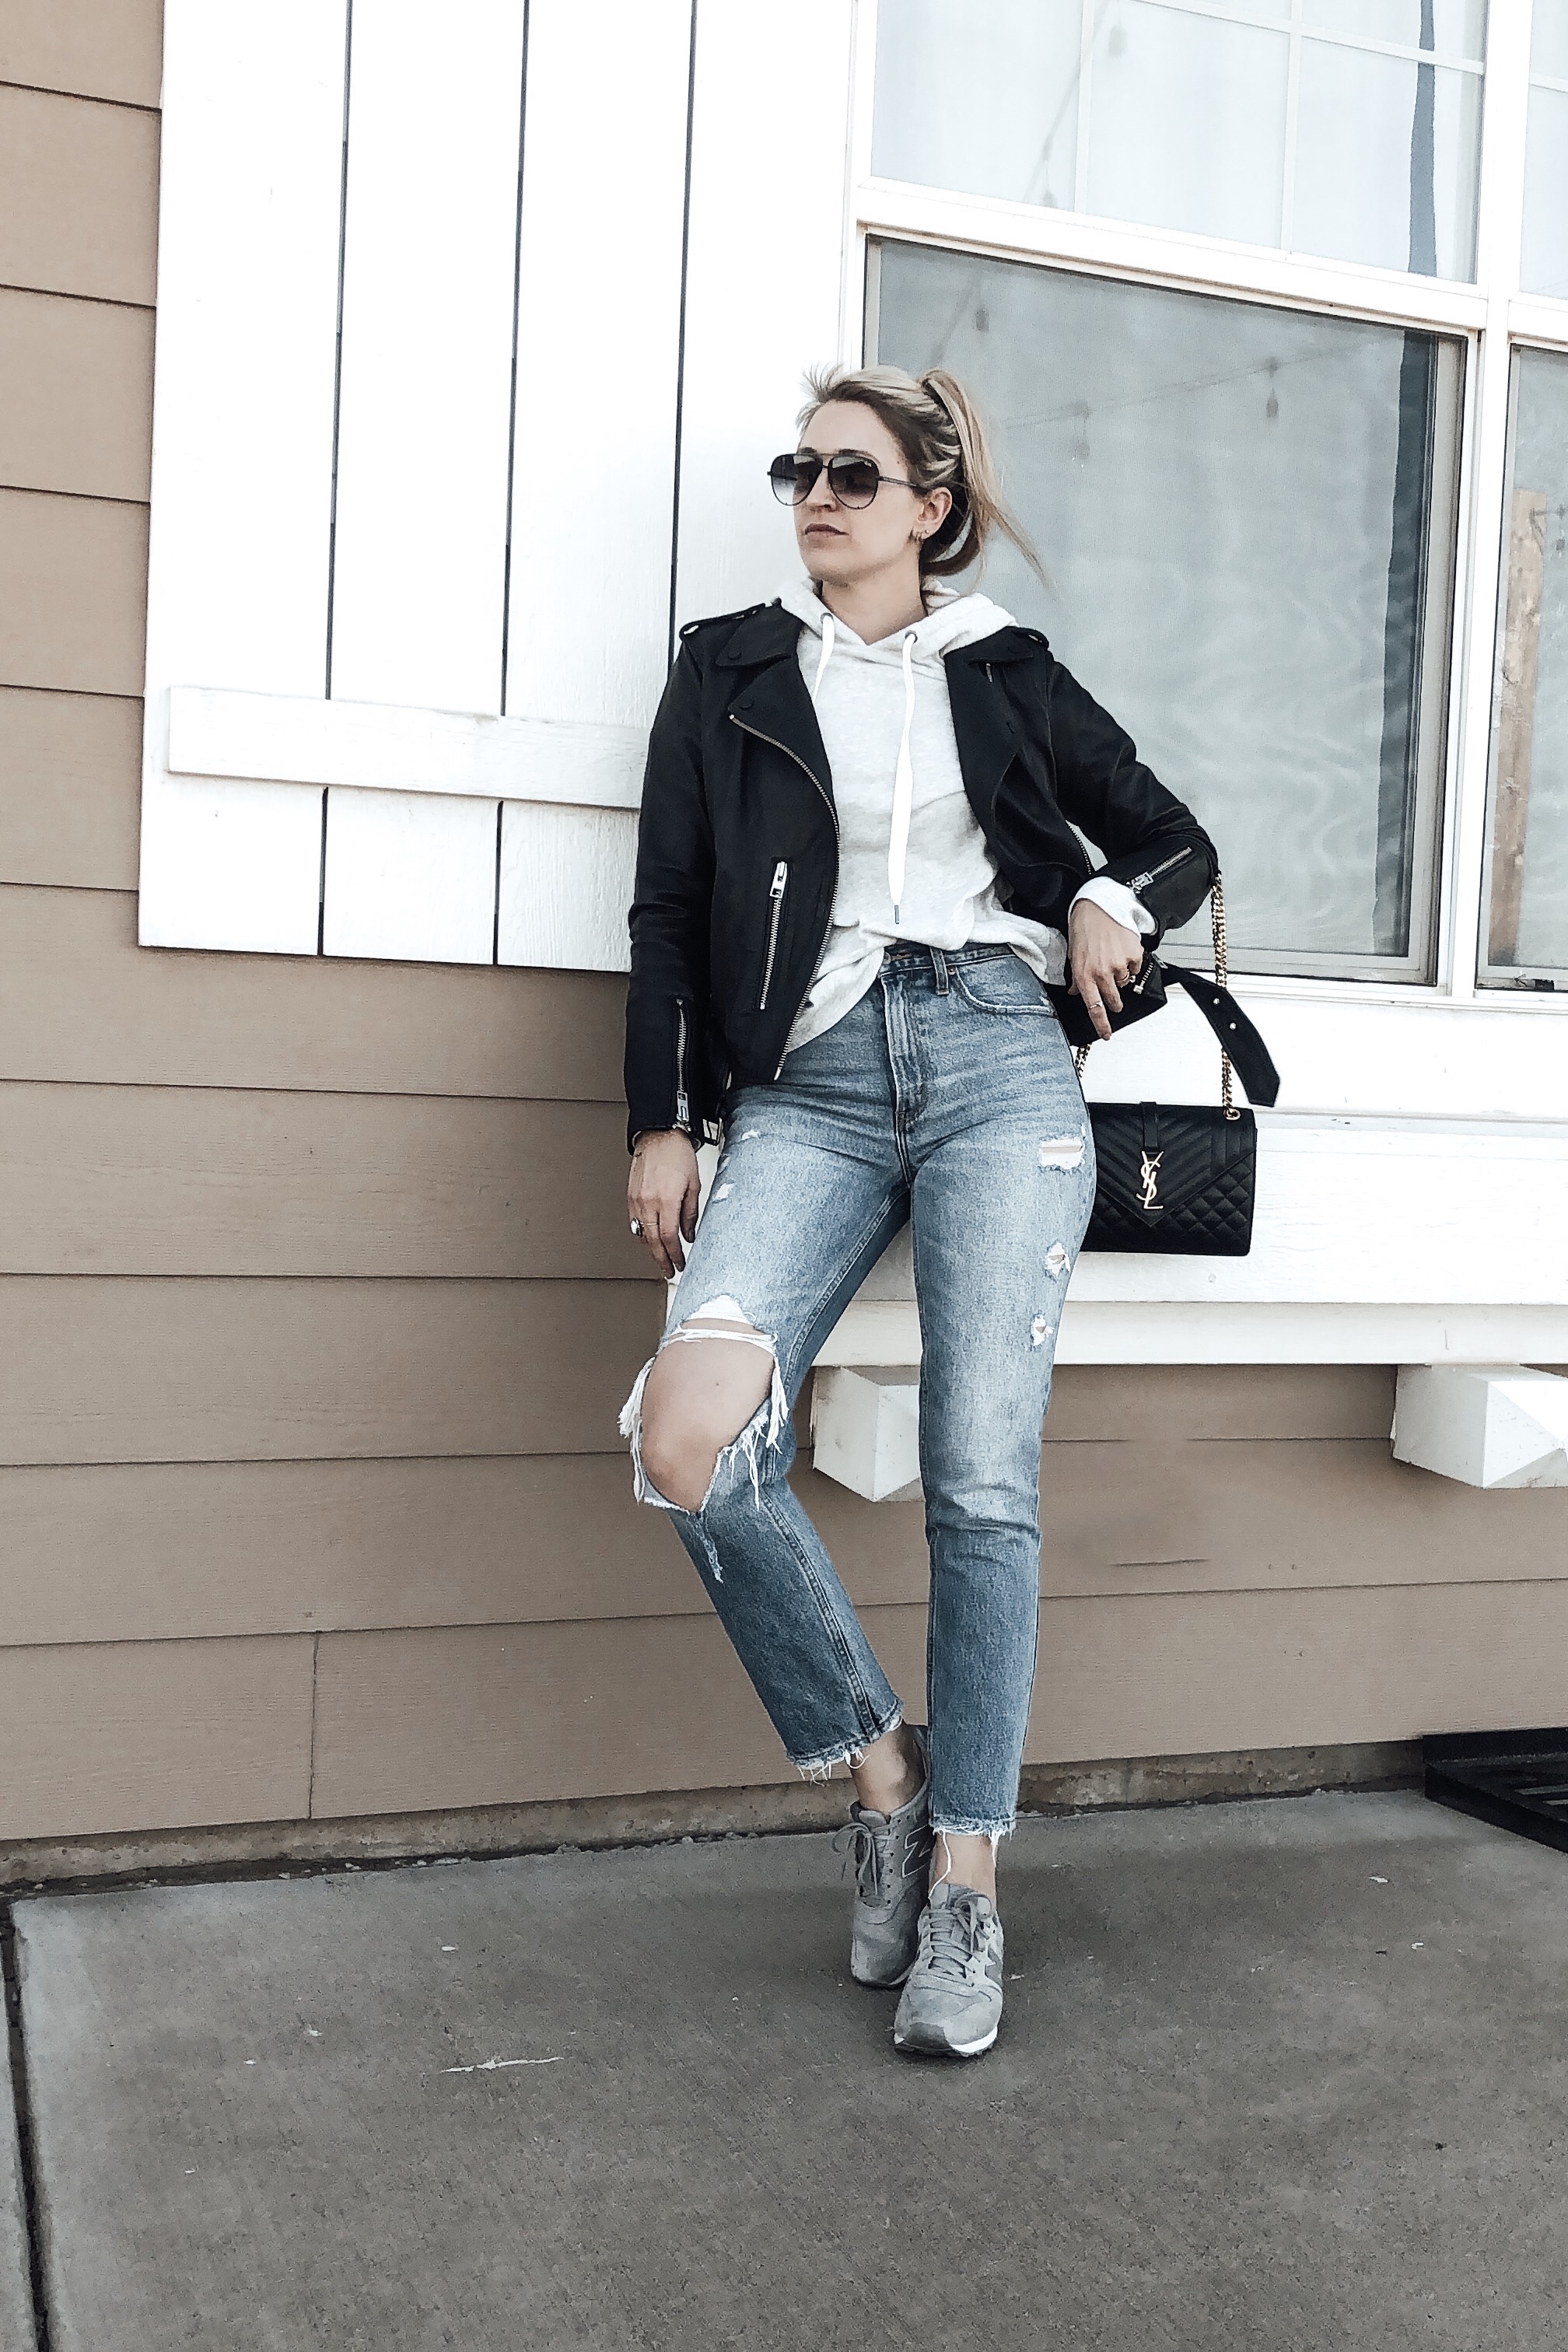 How to Style a Leather Jacket! - The Lane to Fashion